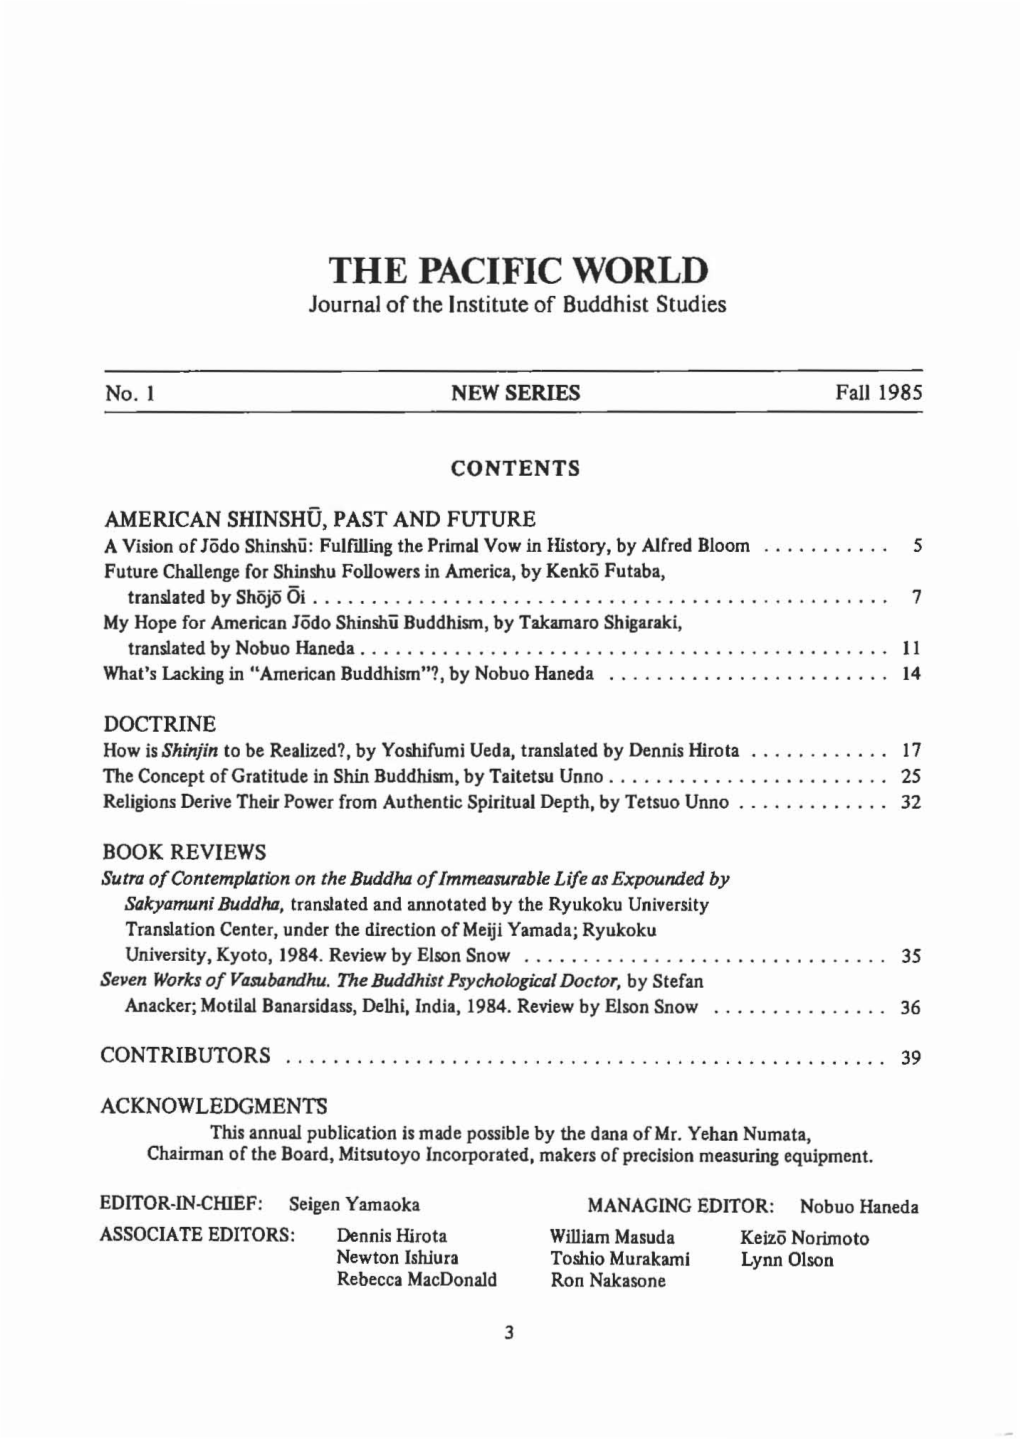 THE PACIFIC WORLD Journal of the Institute of Buddhist Studies